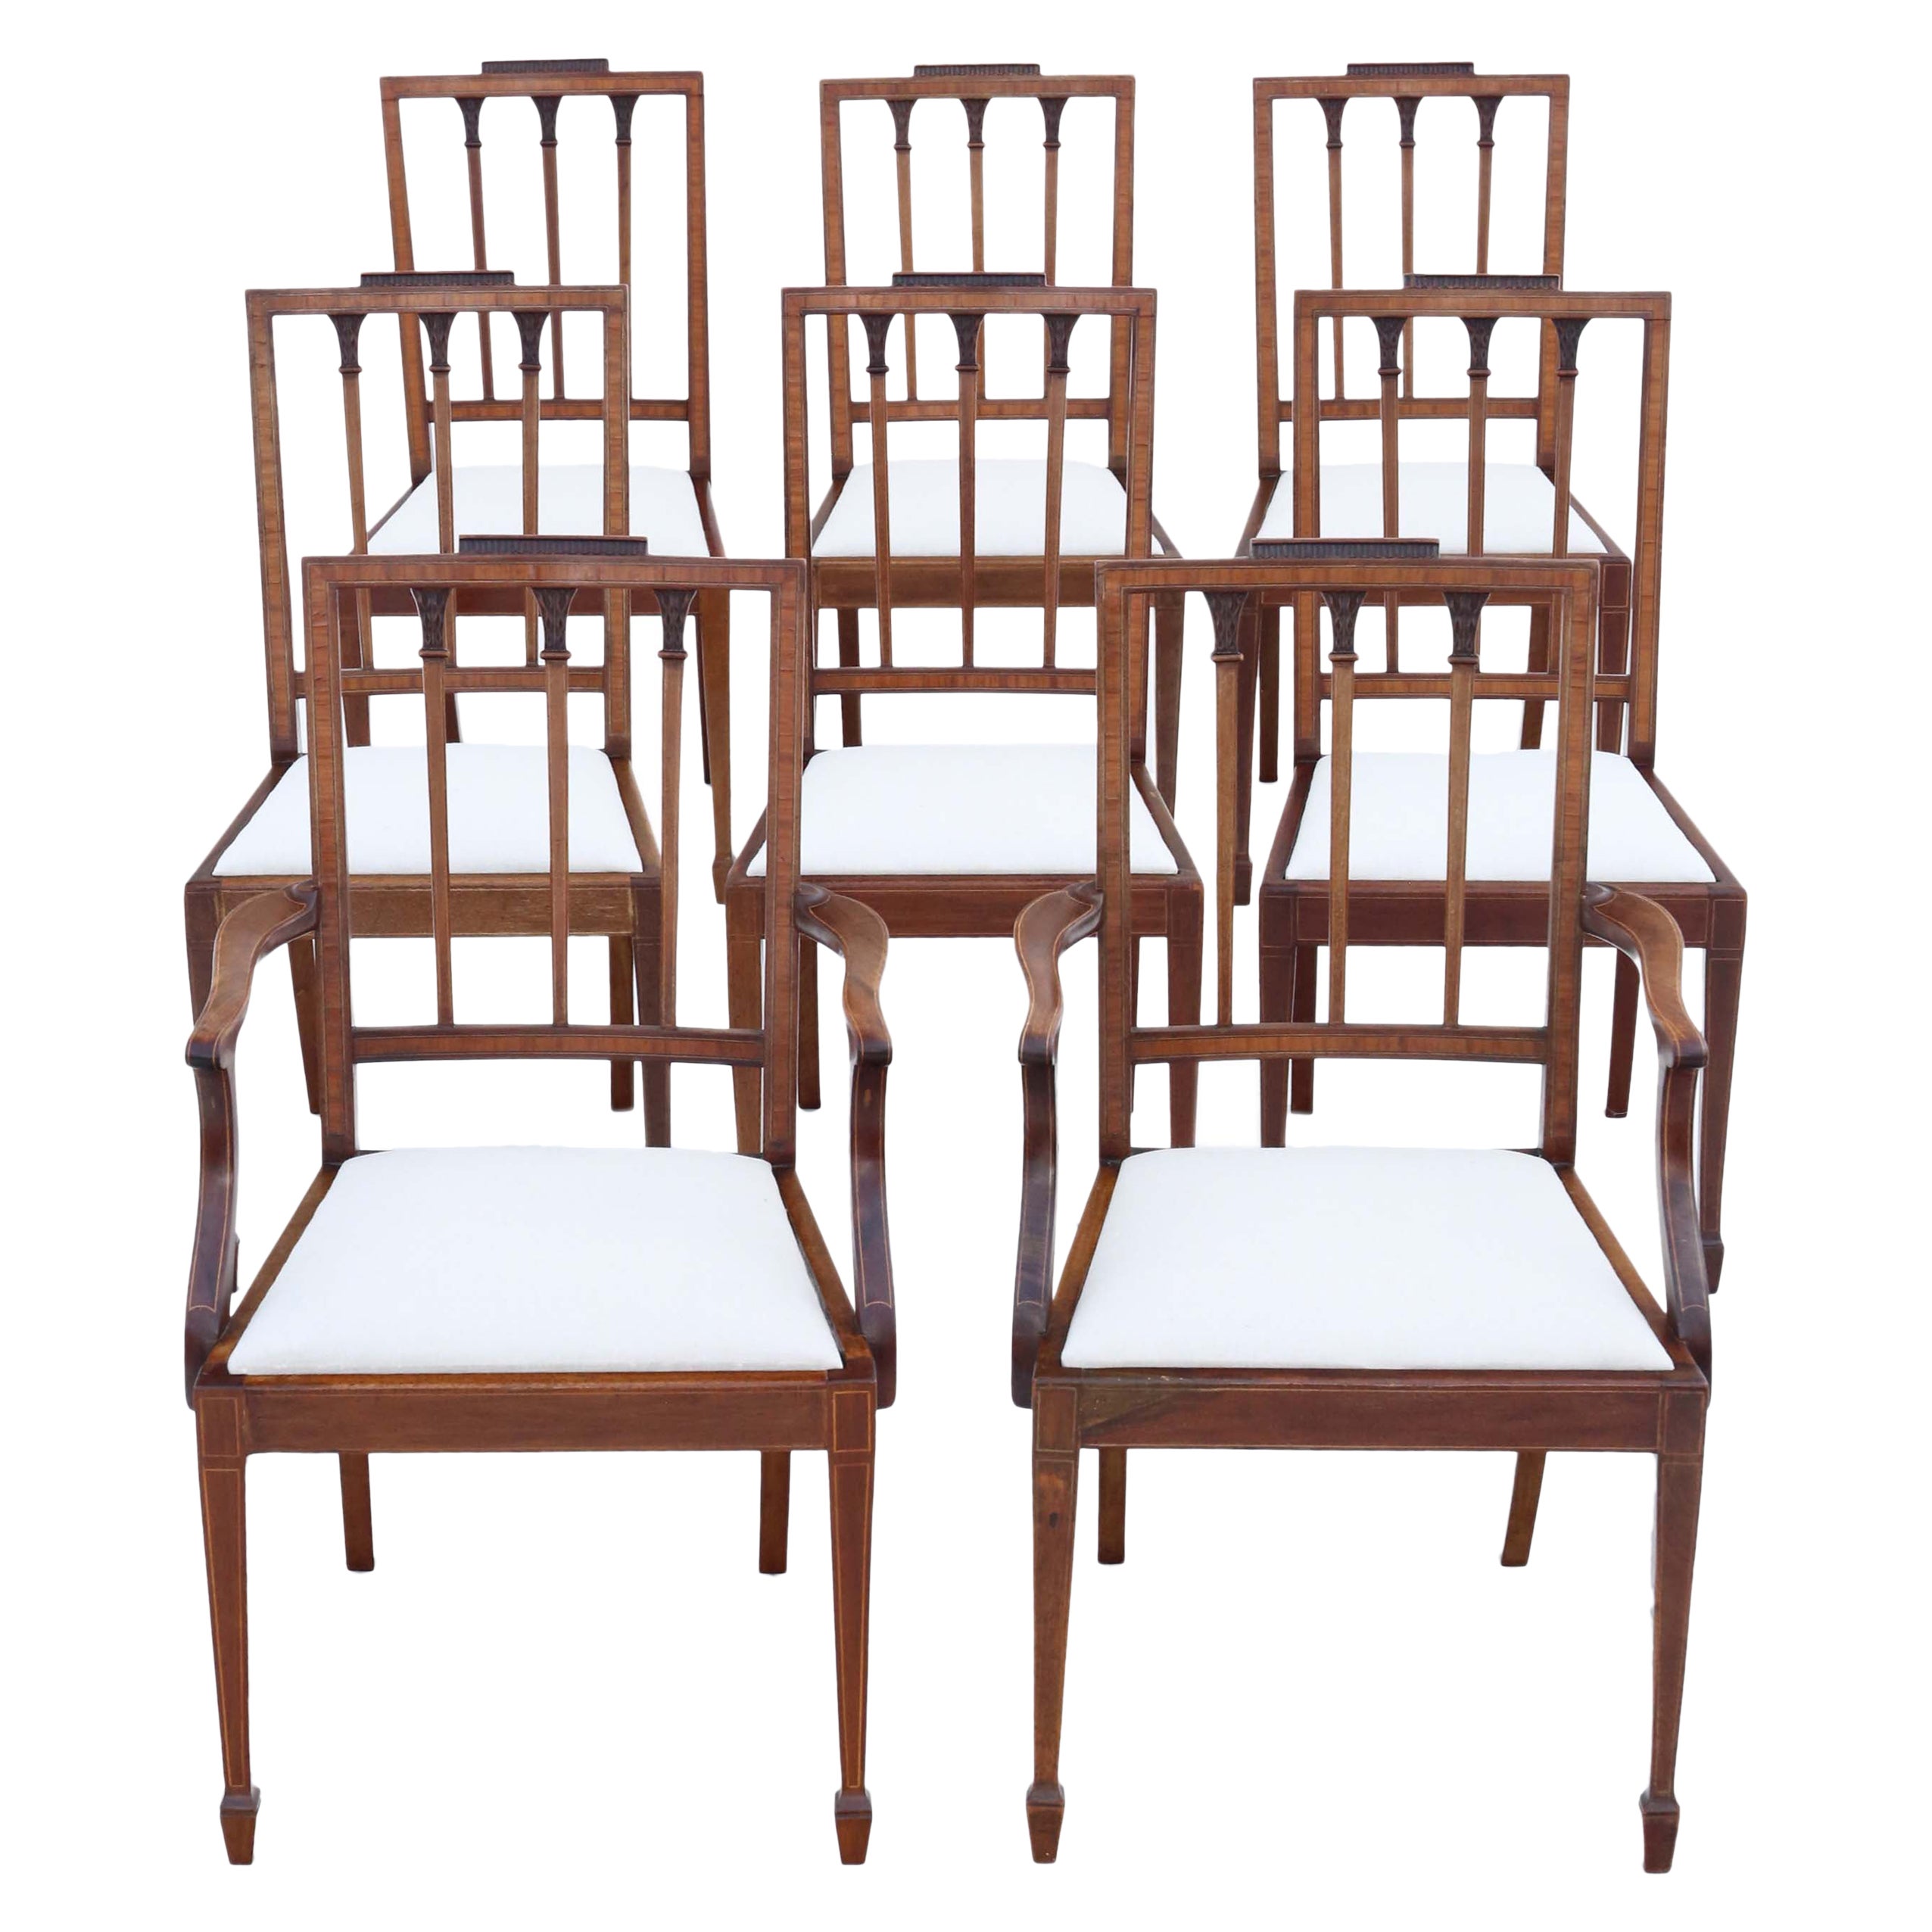 Antique Fine Quality Set of 8 '6 + 2' Georgian Revival Mahogany Dining Chairs C1